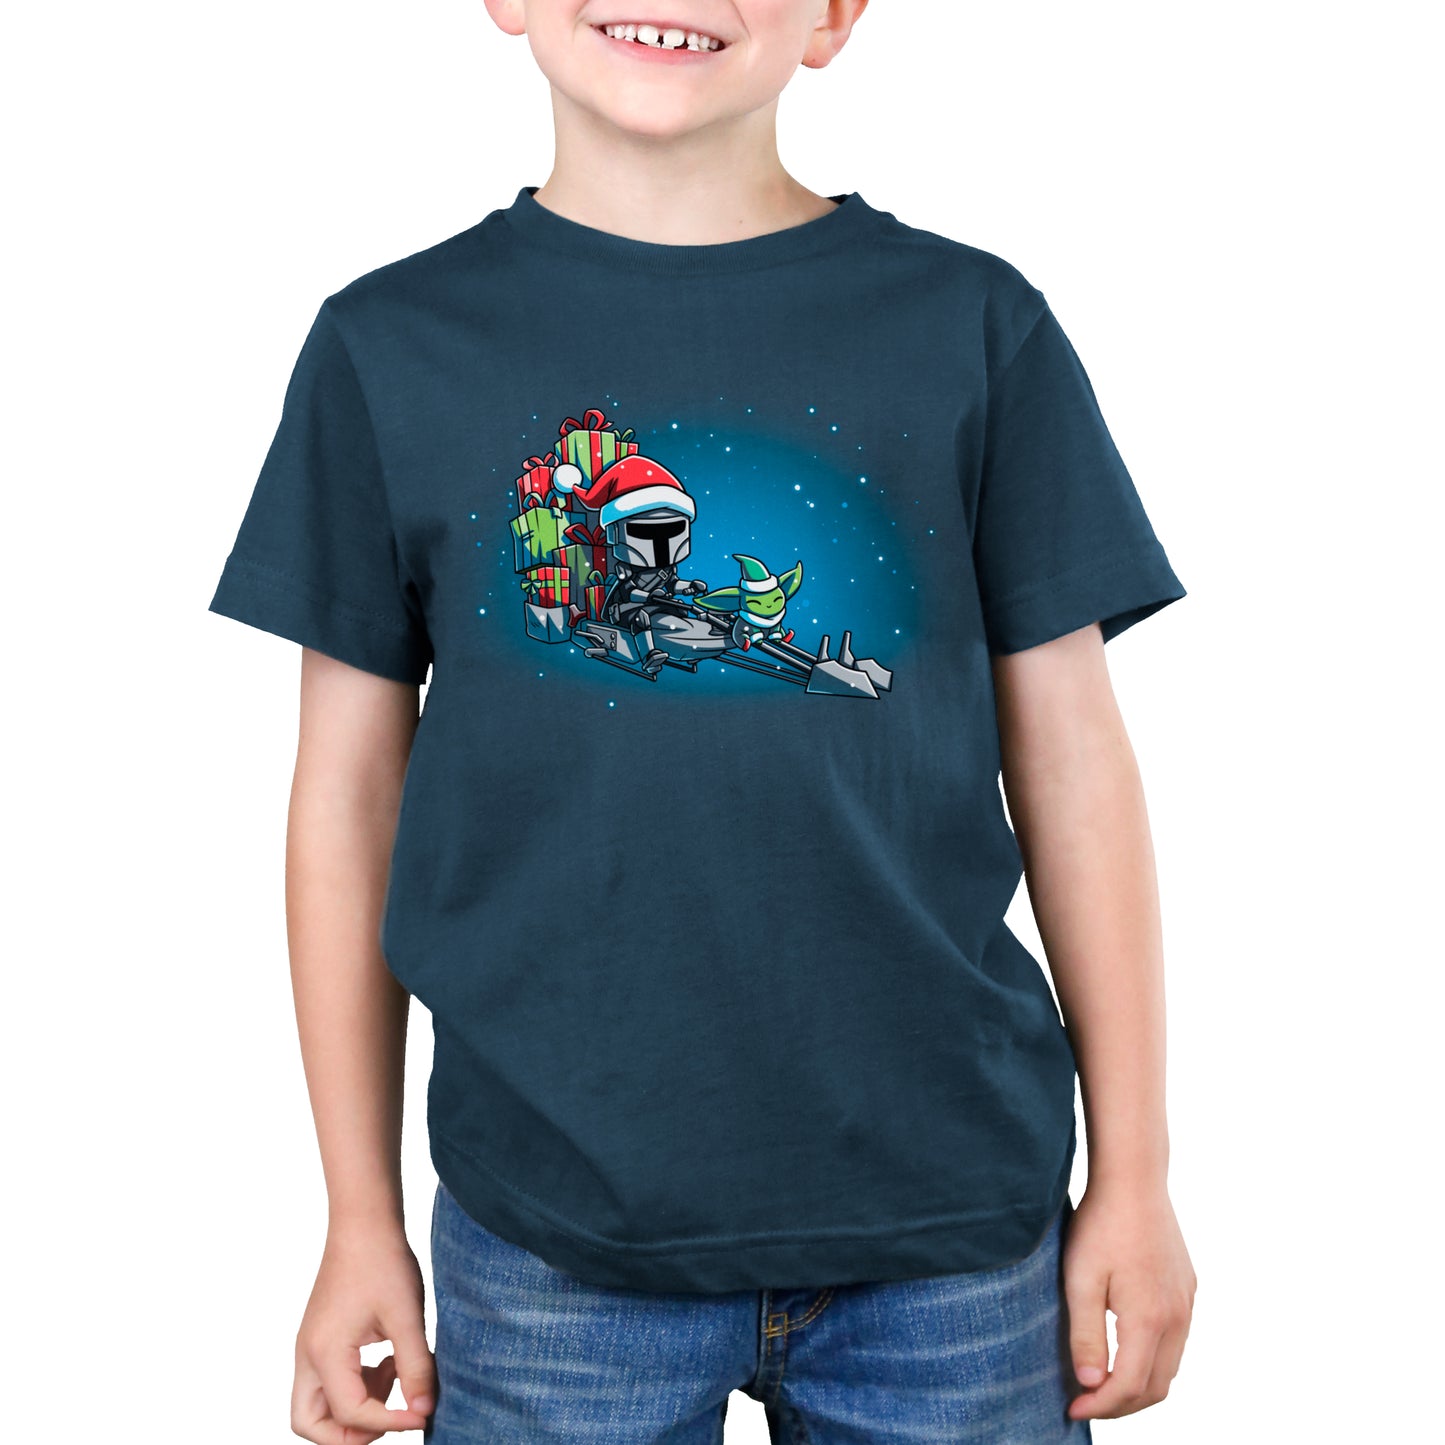 A young boy wearing a Star Wars themed T-shirt called "Bring Home the Bounty".